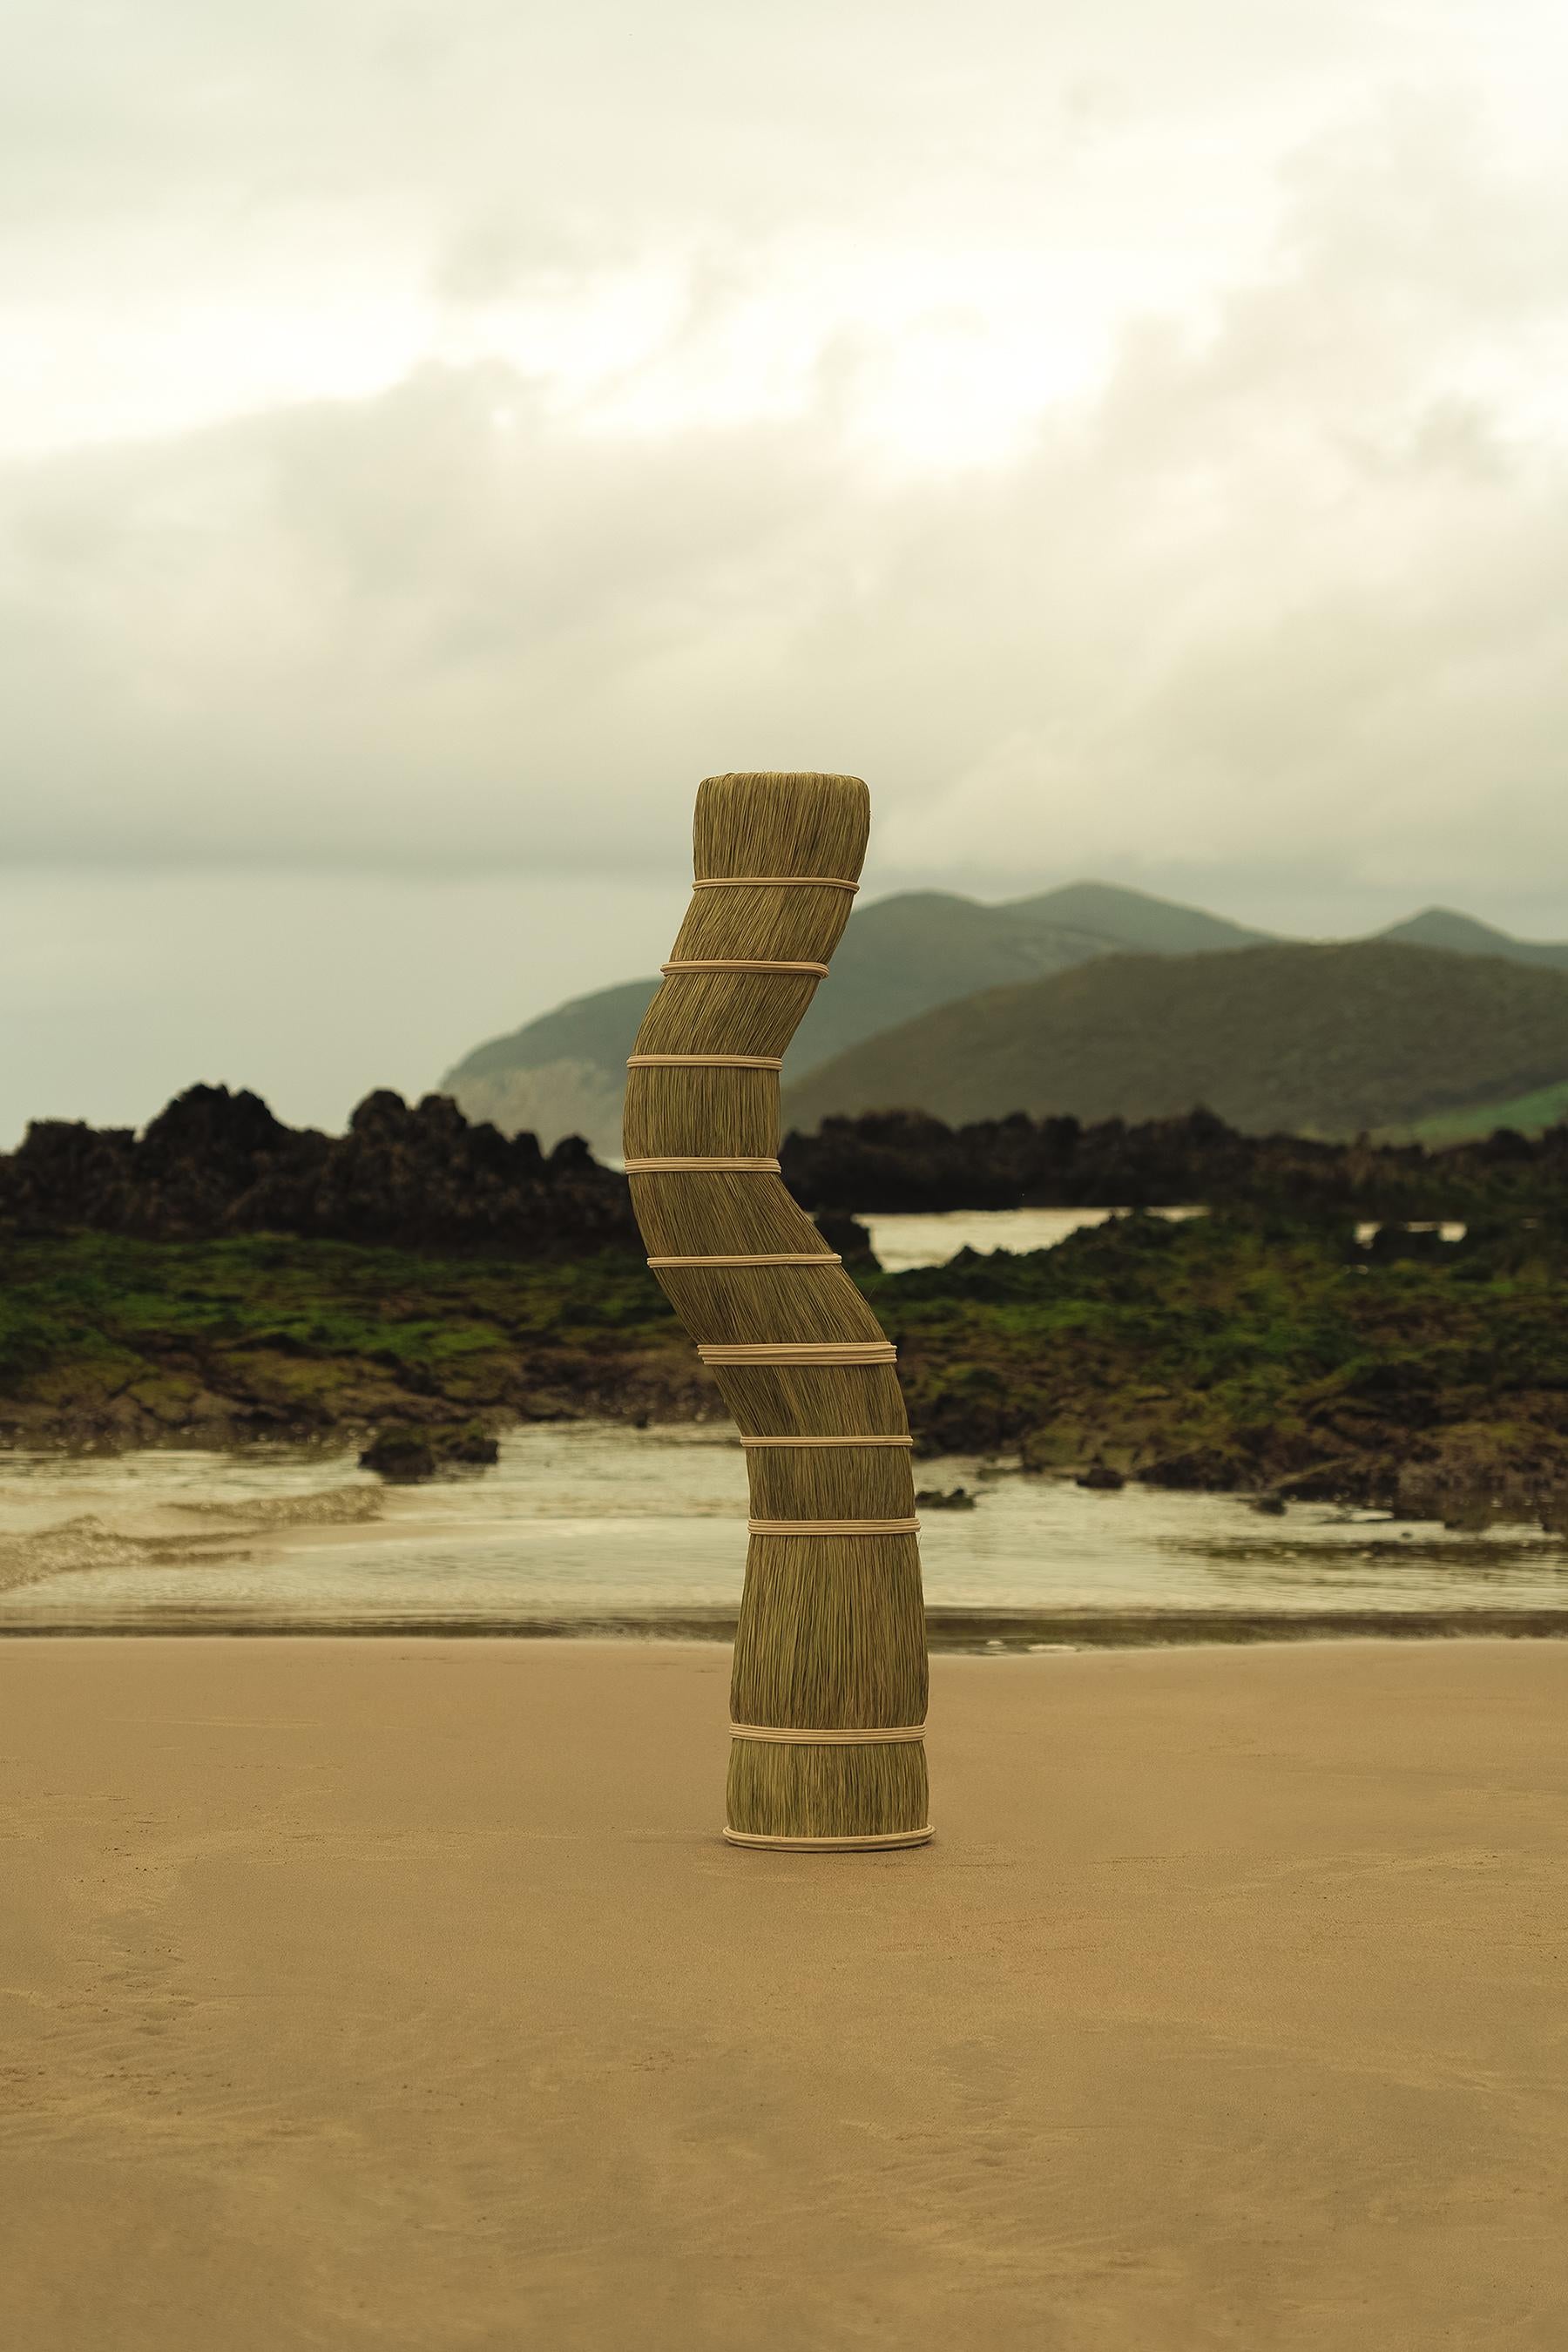 Taking the form of a pillar, this artwork embodies the very principle of torsion that esparto weavers apply on a miniature scale to each fibre. It twists and yet it holds, reminding us of the dialogue every curve secretly maintains with